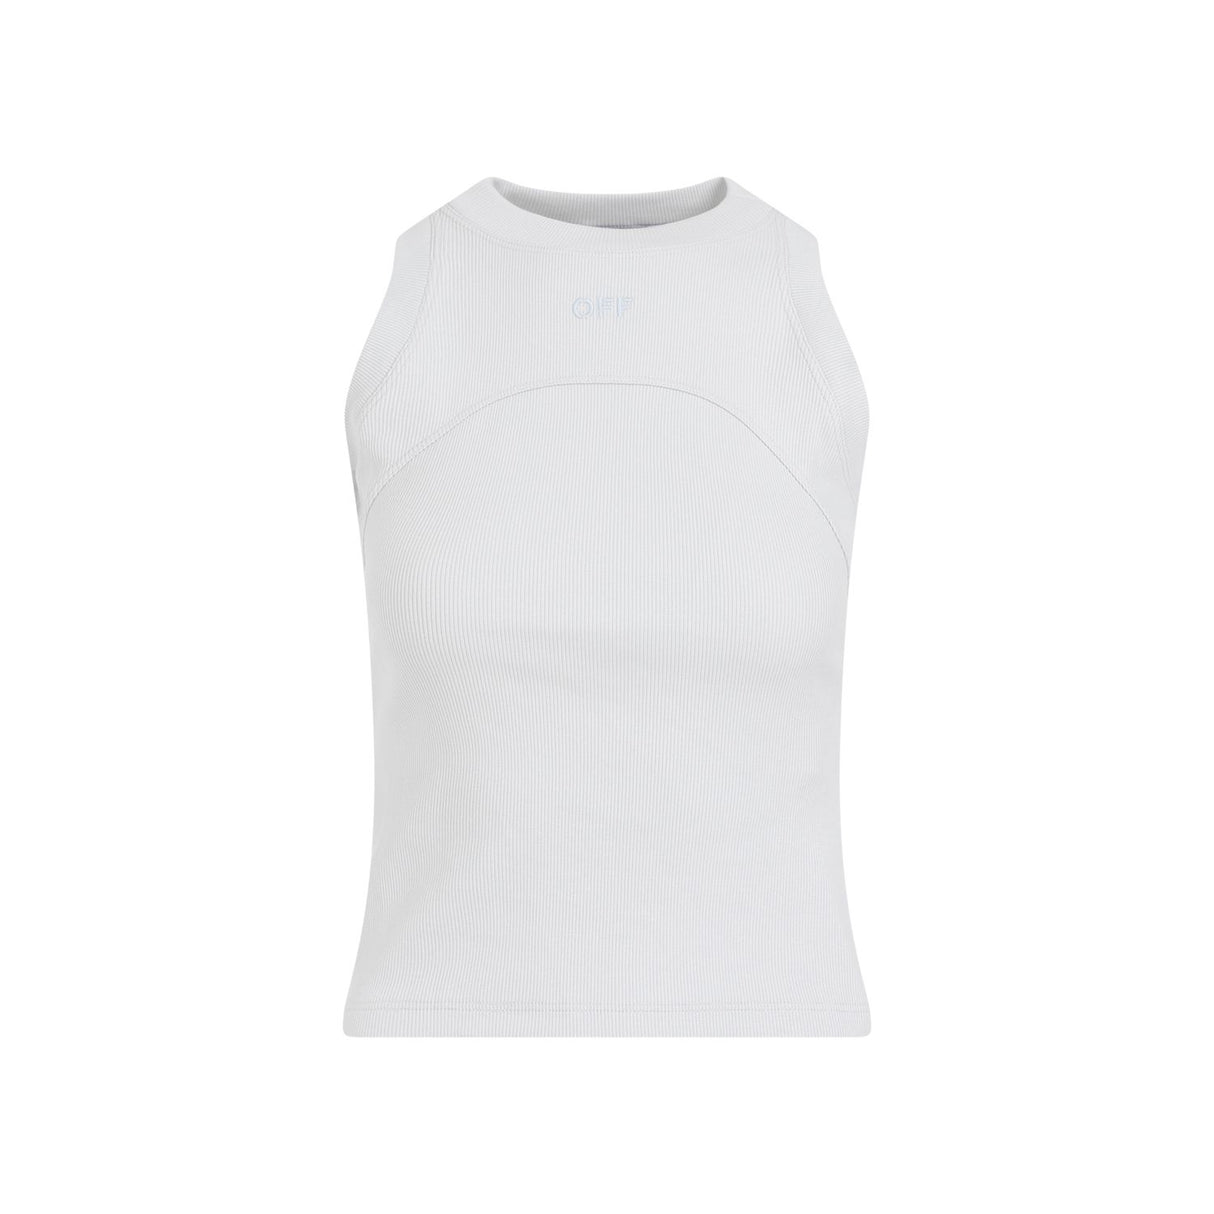 Blue Stamp Rib Round Tank Top for Women - SS24 Collection